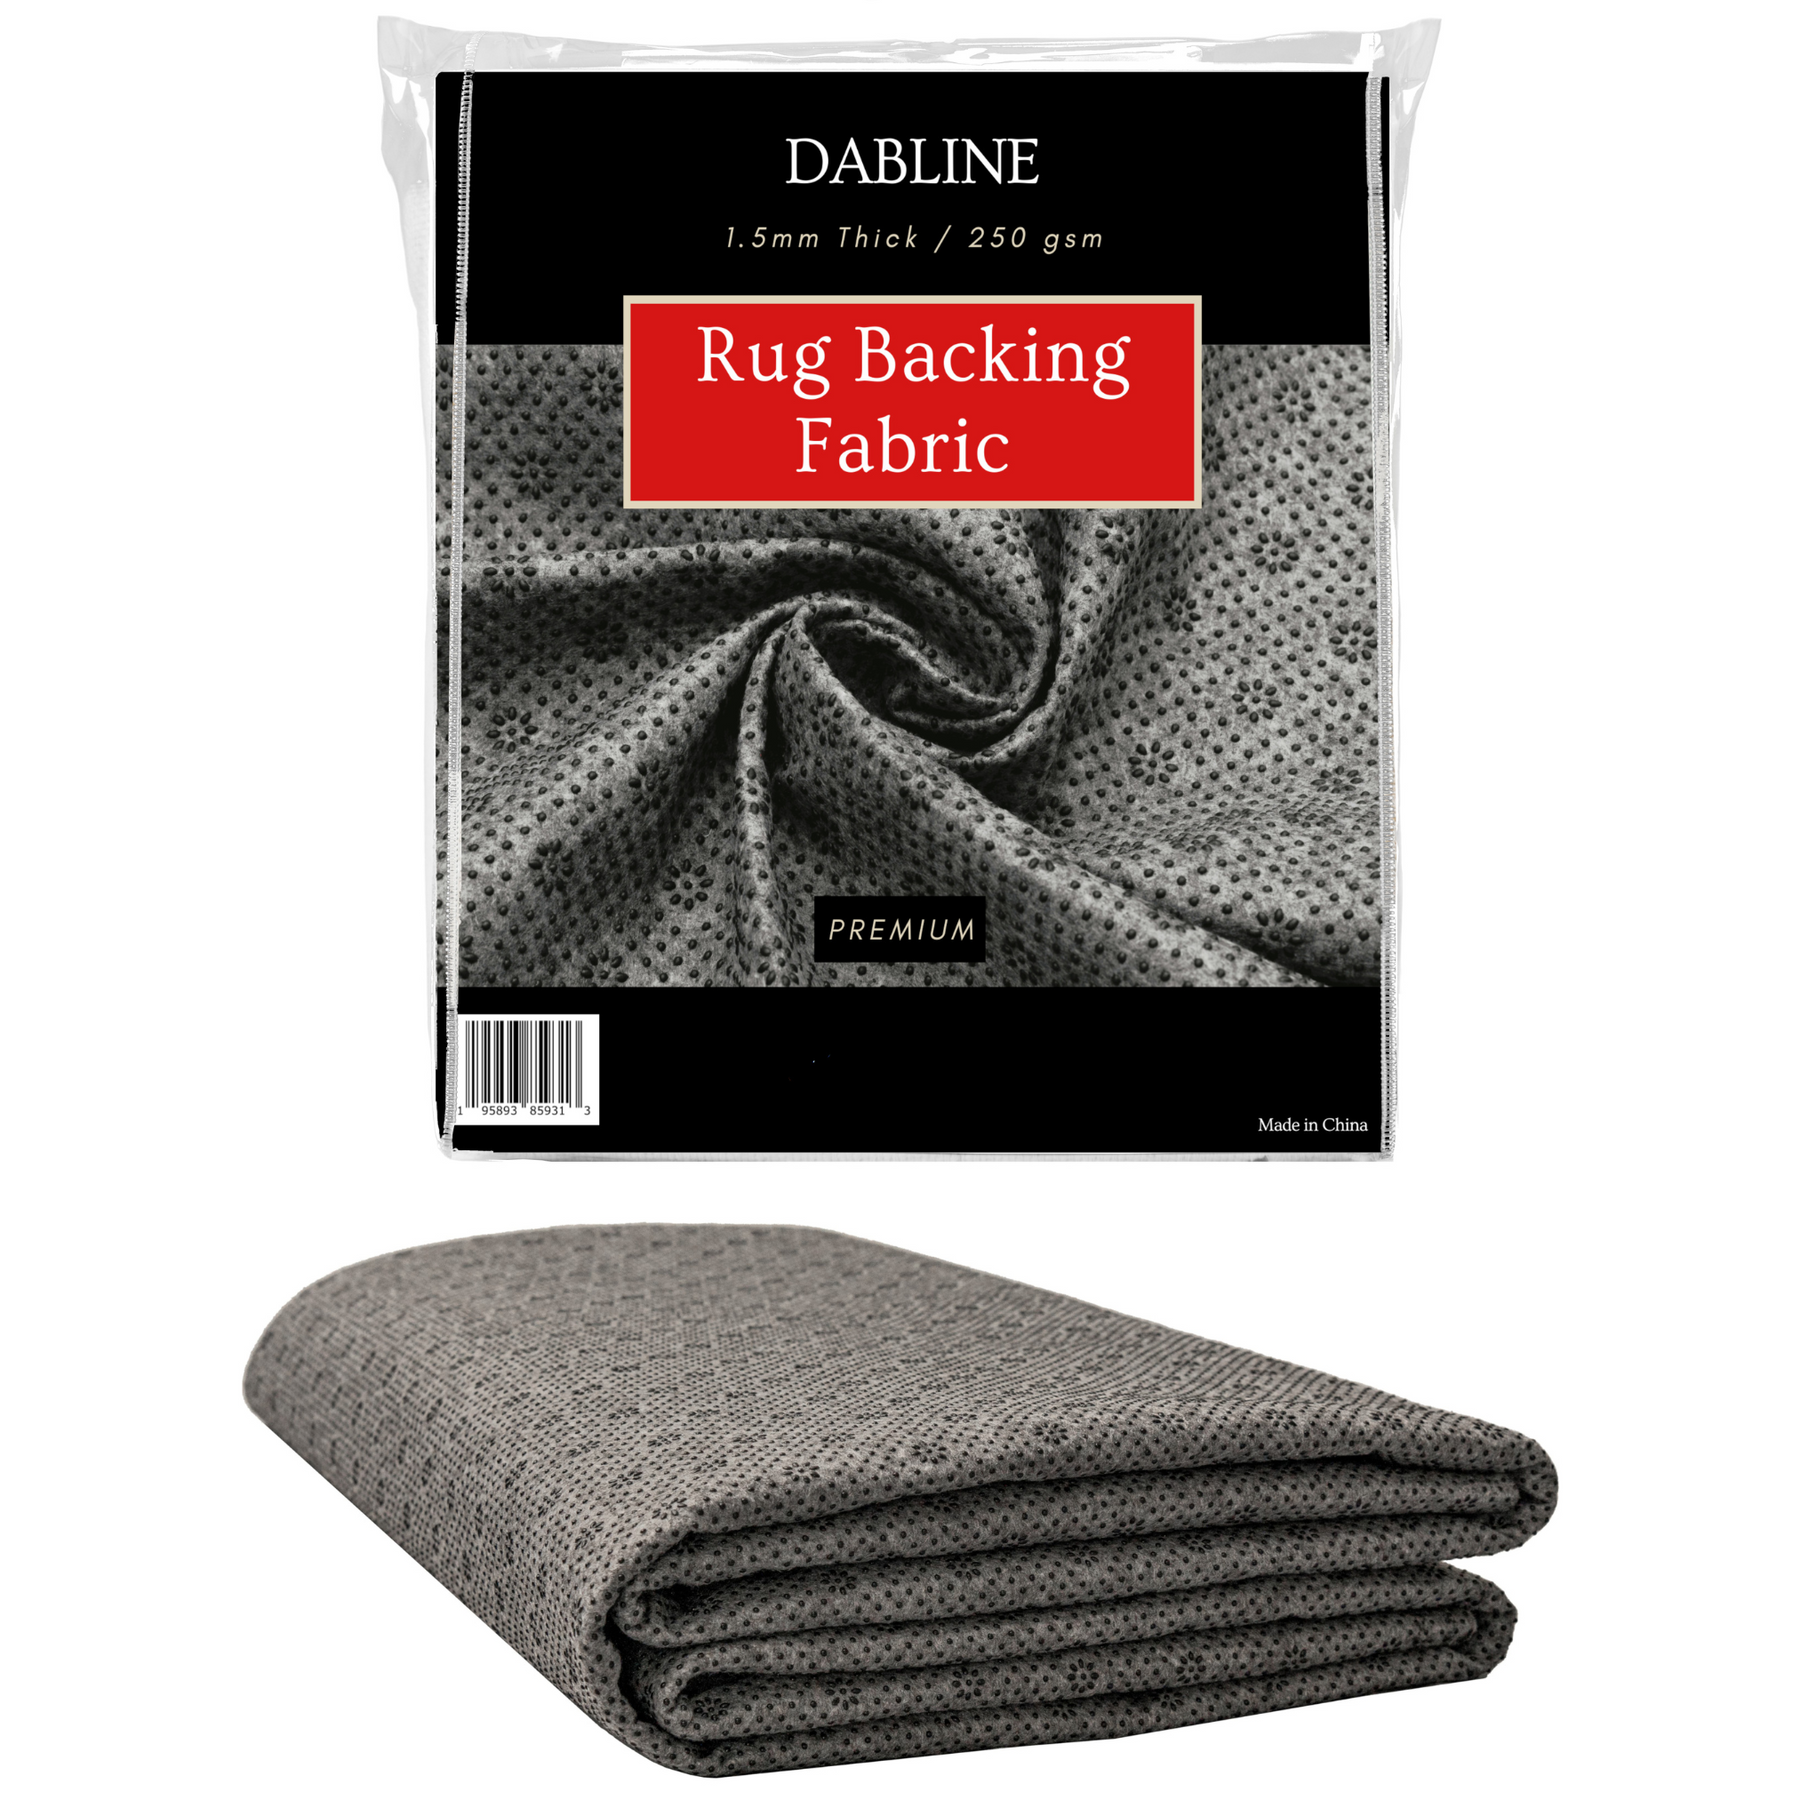 Backing Fabric with Grippy Non Slip Rubber Dots – Dabline